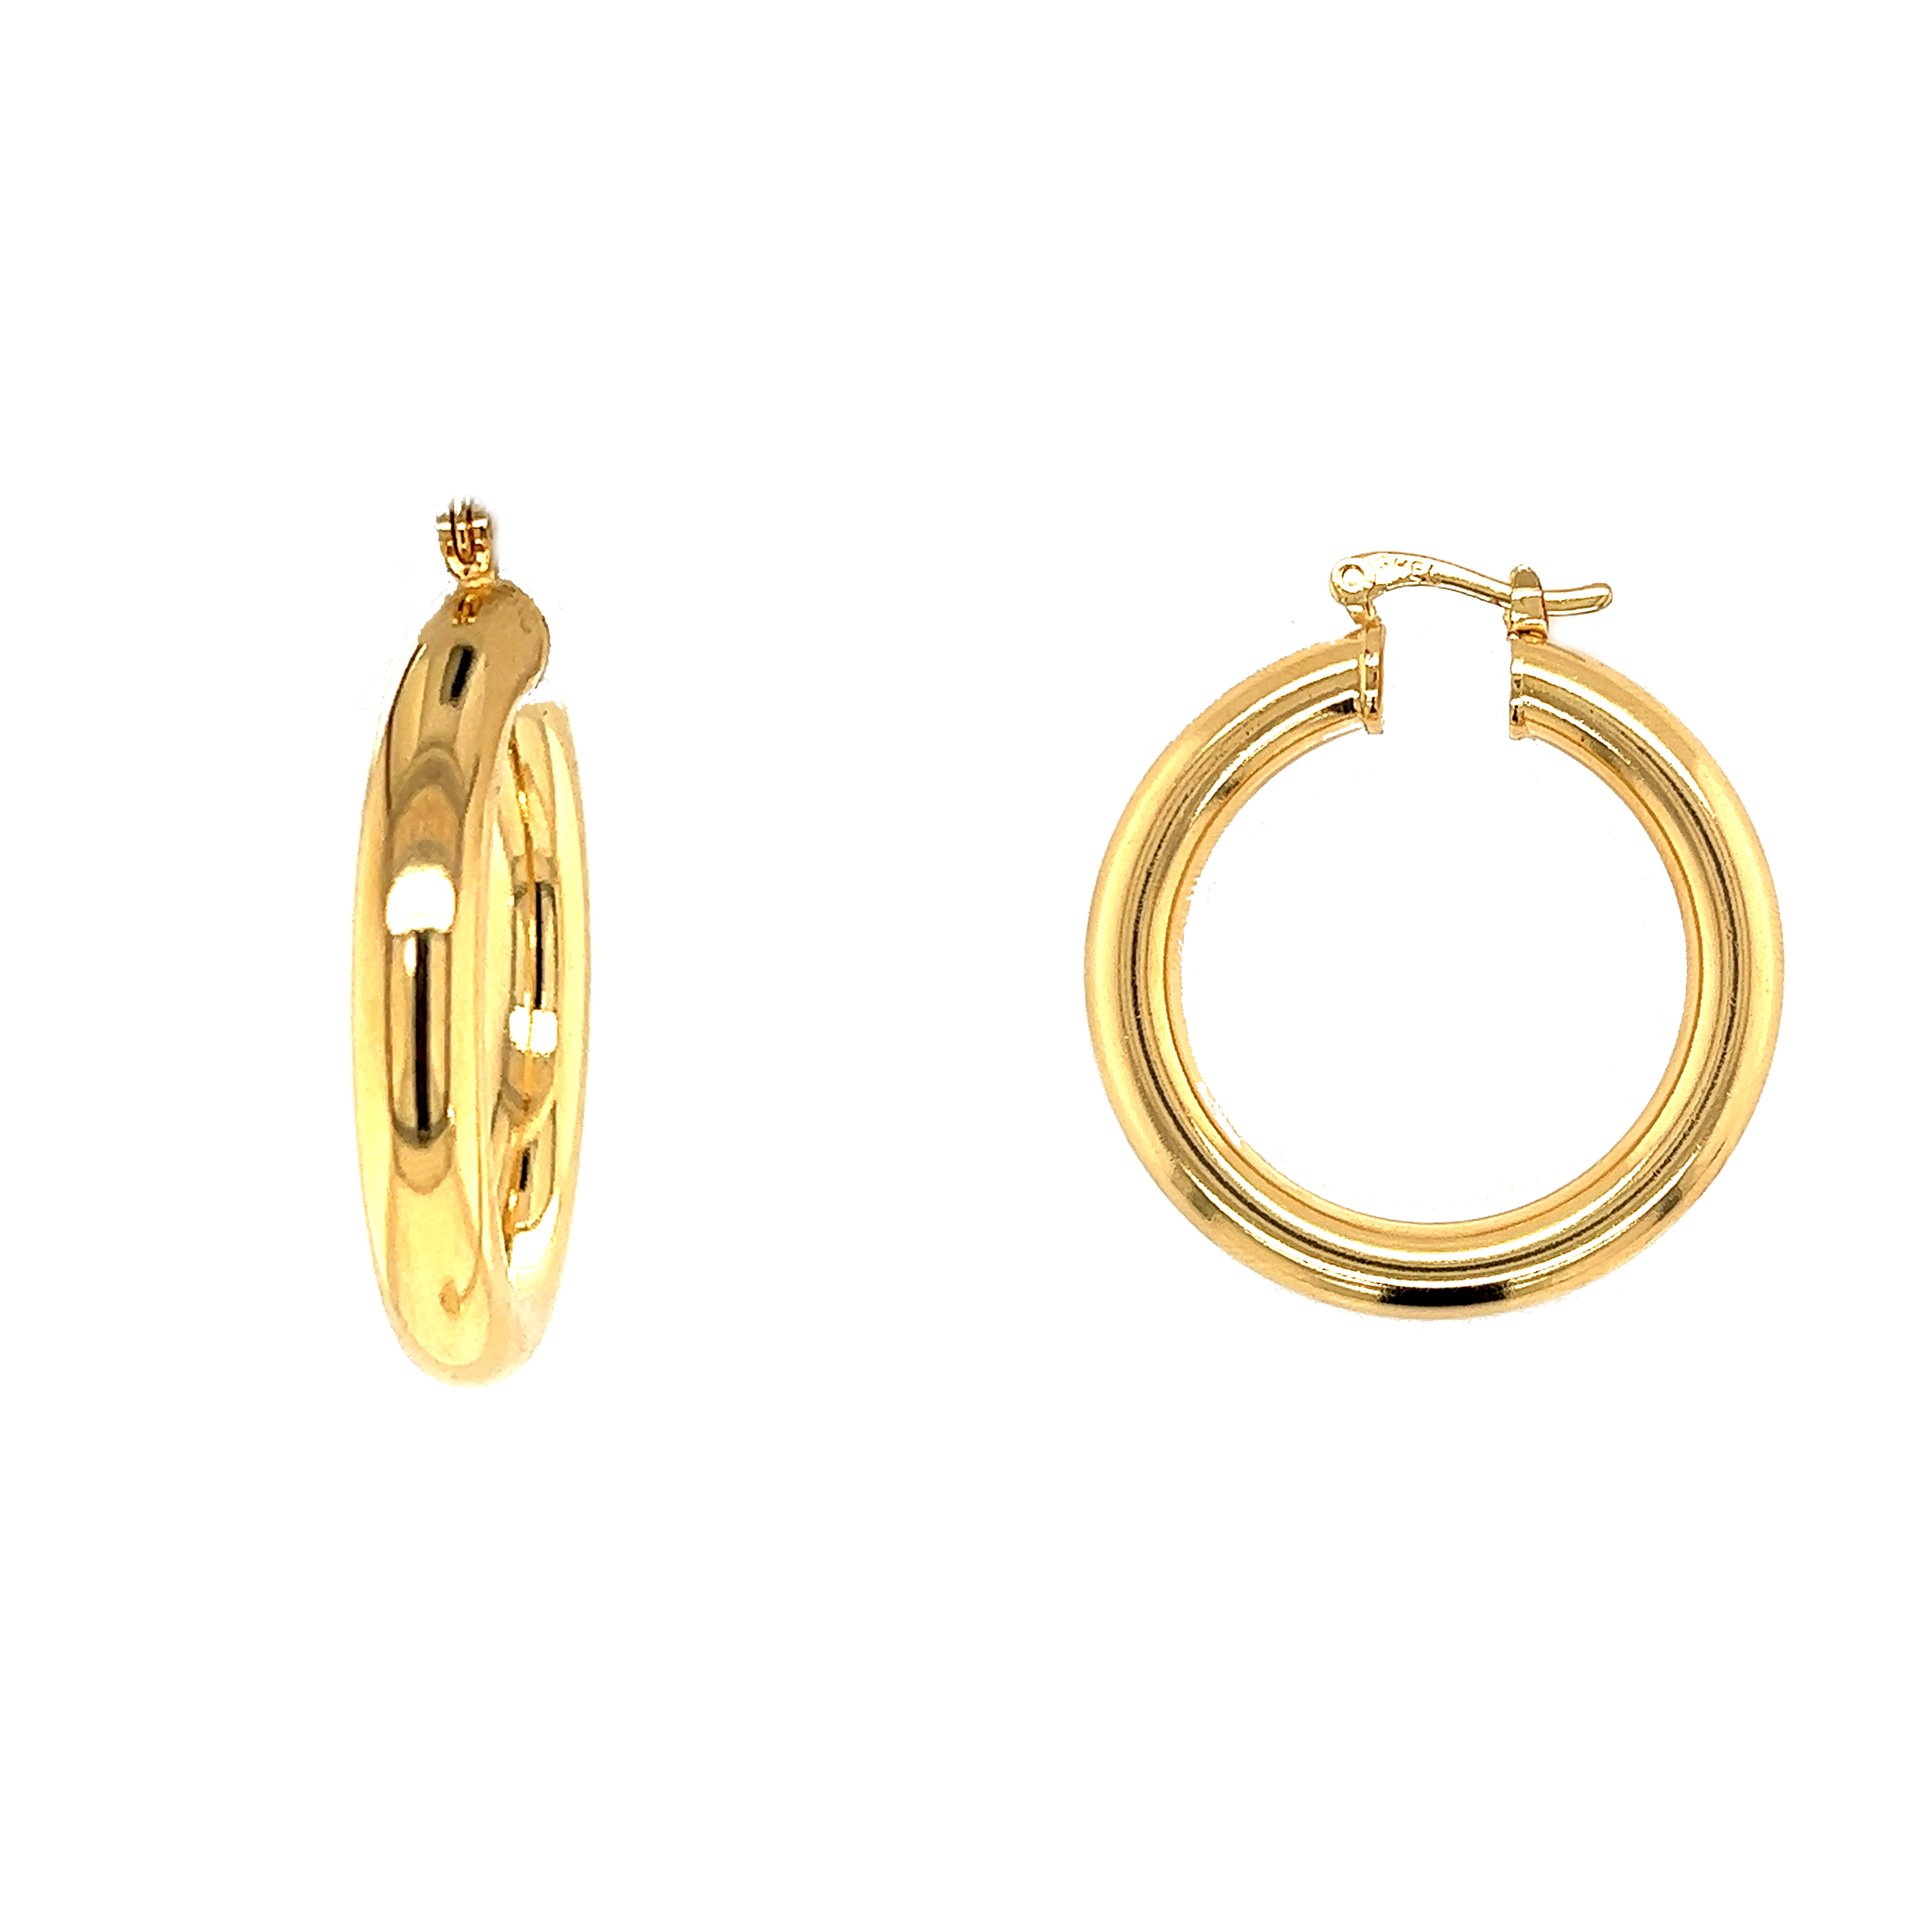 5mm x 37mm Gold Filled Hoops